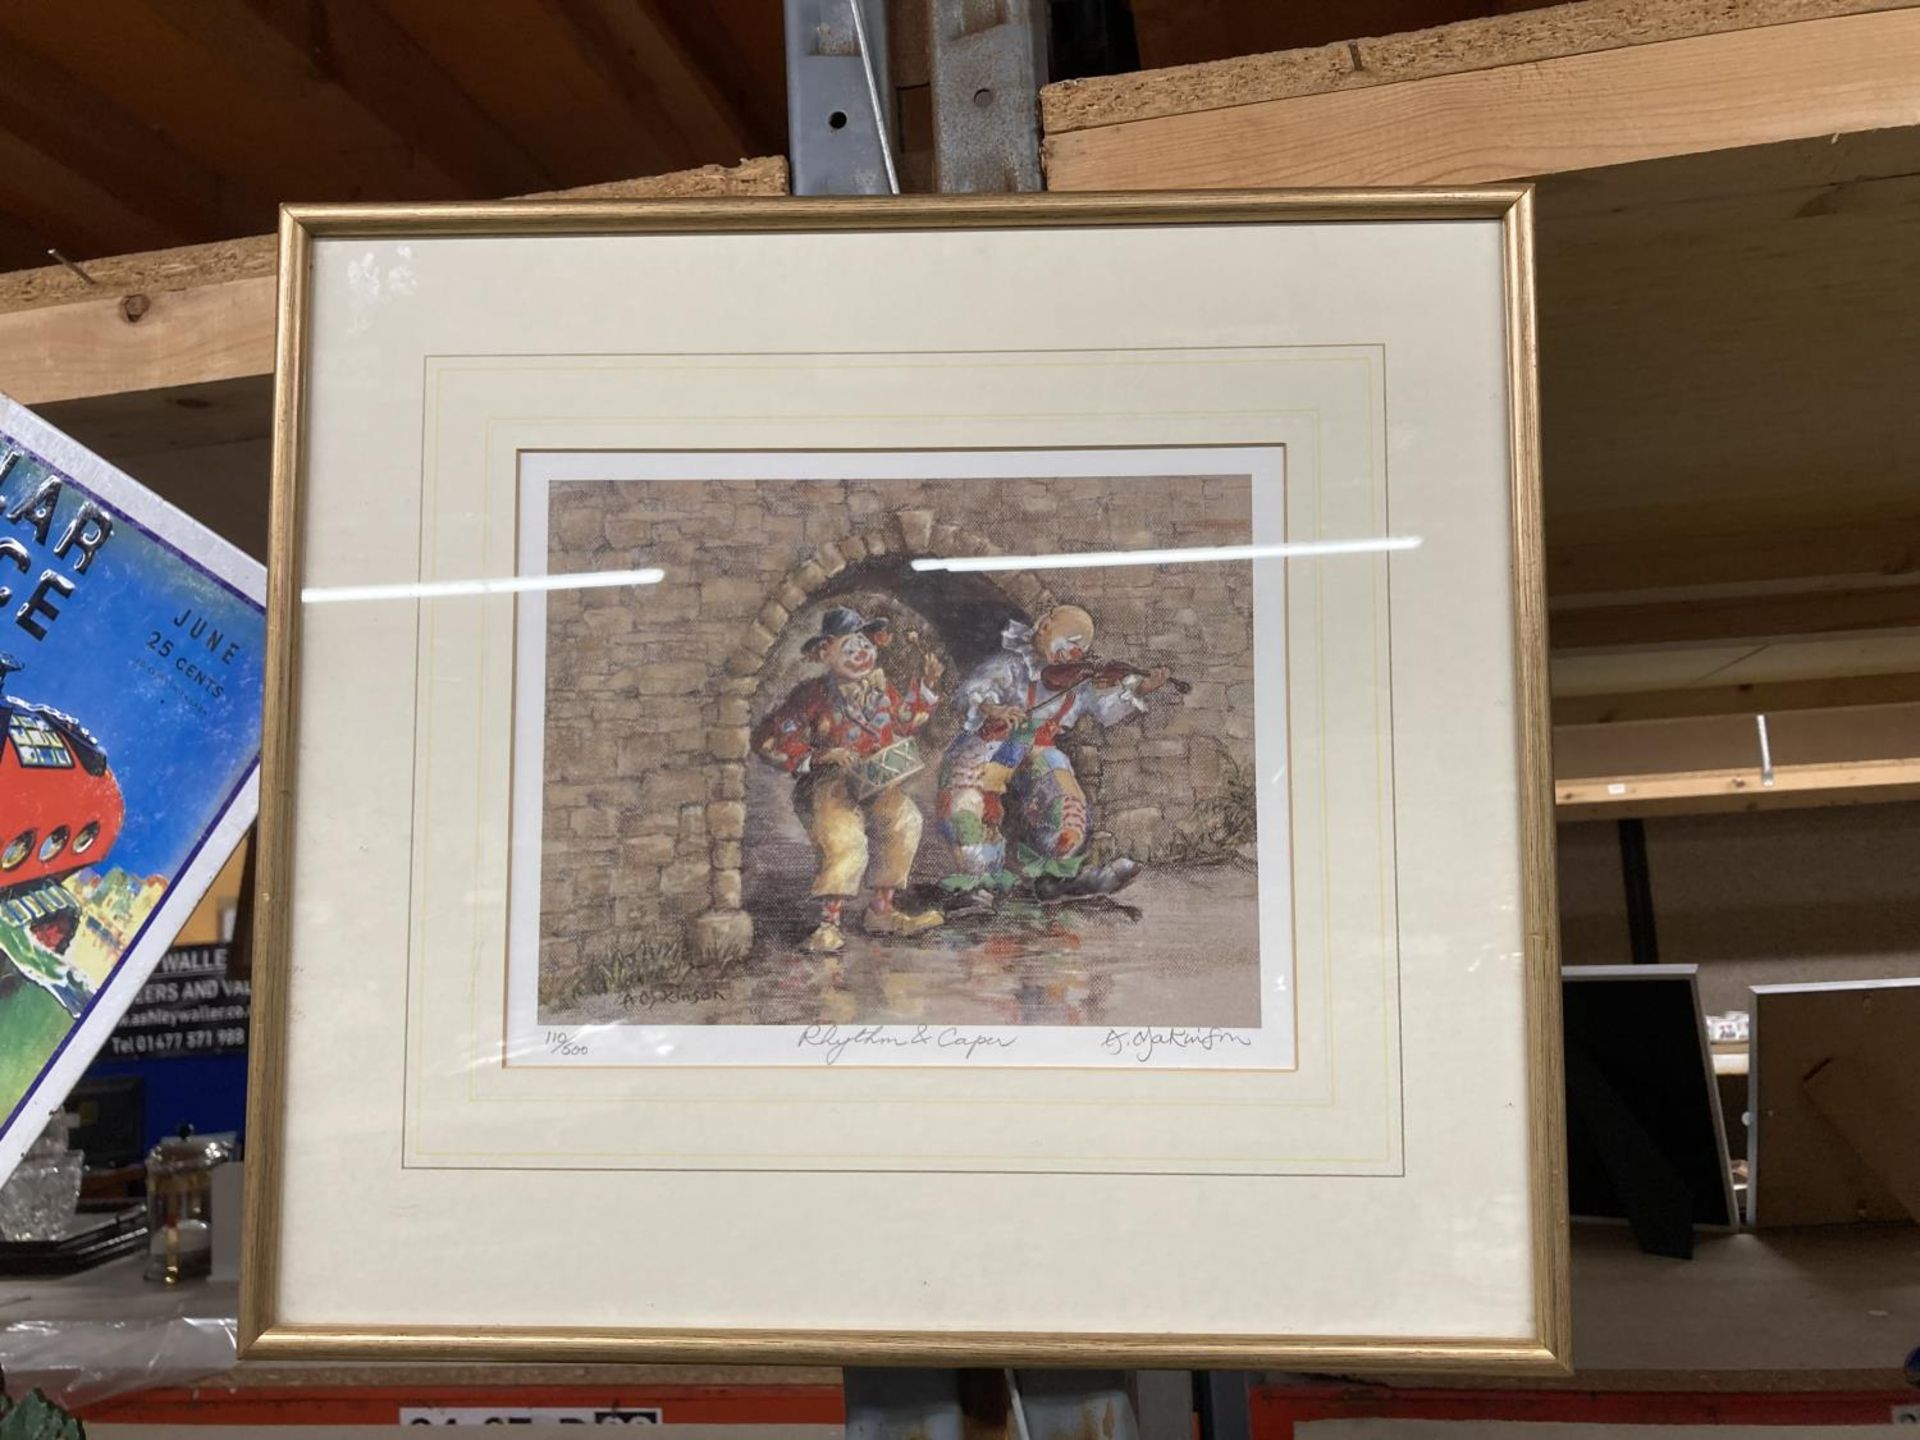 A FRAMED A MATKINSON SIGNED LIMITED EDITION 110/500 PRINT RHYTHM AND CAPER